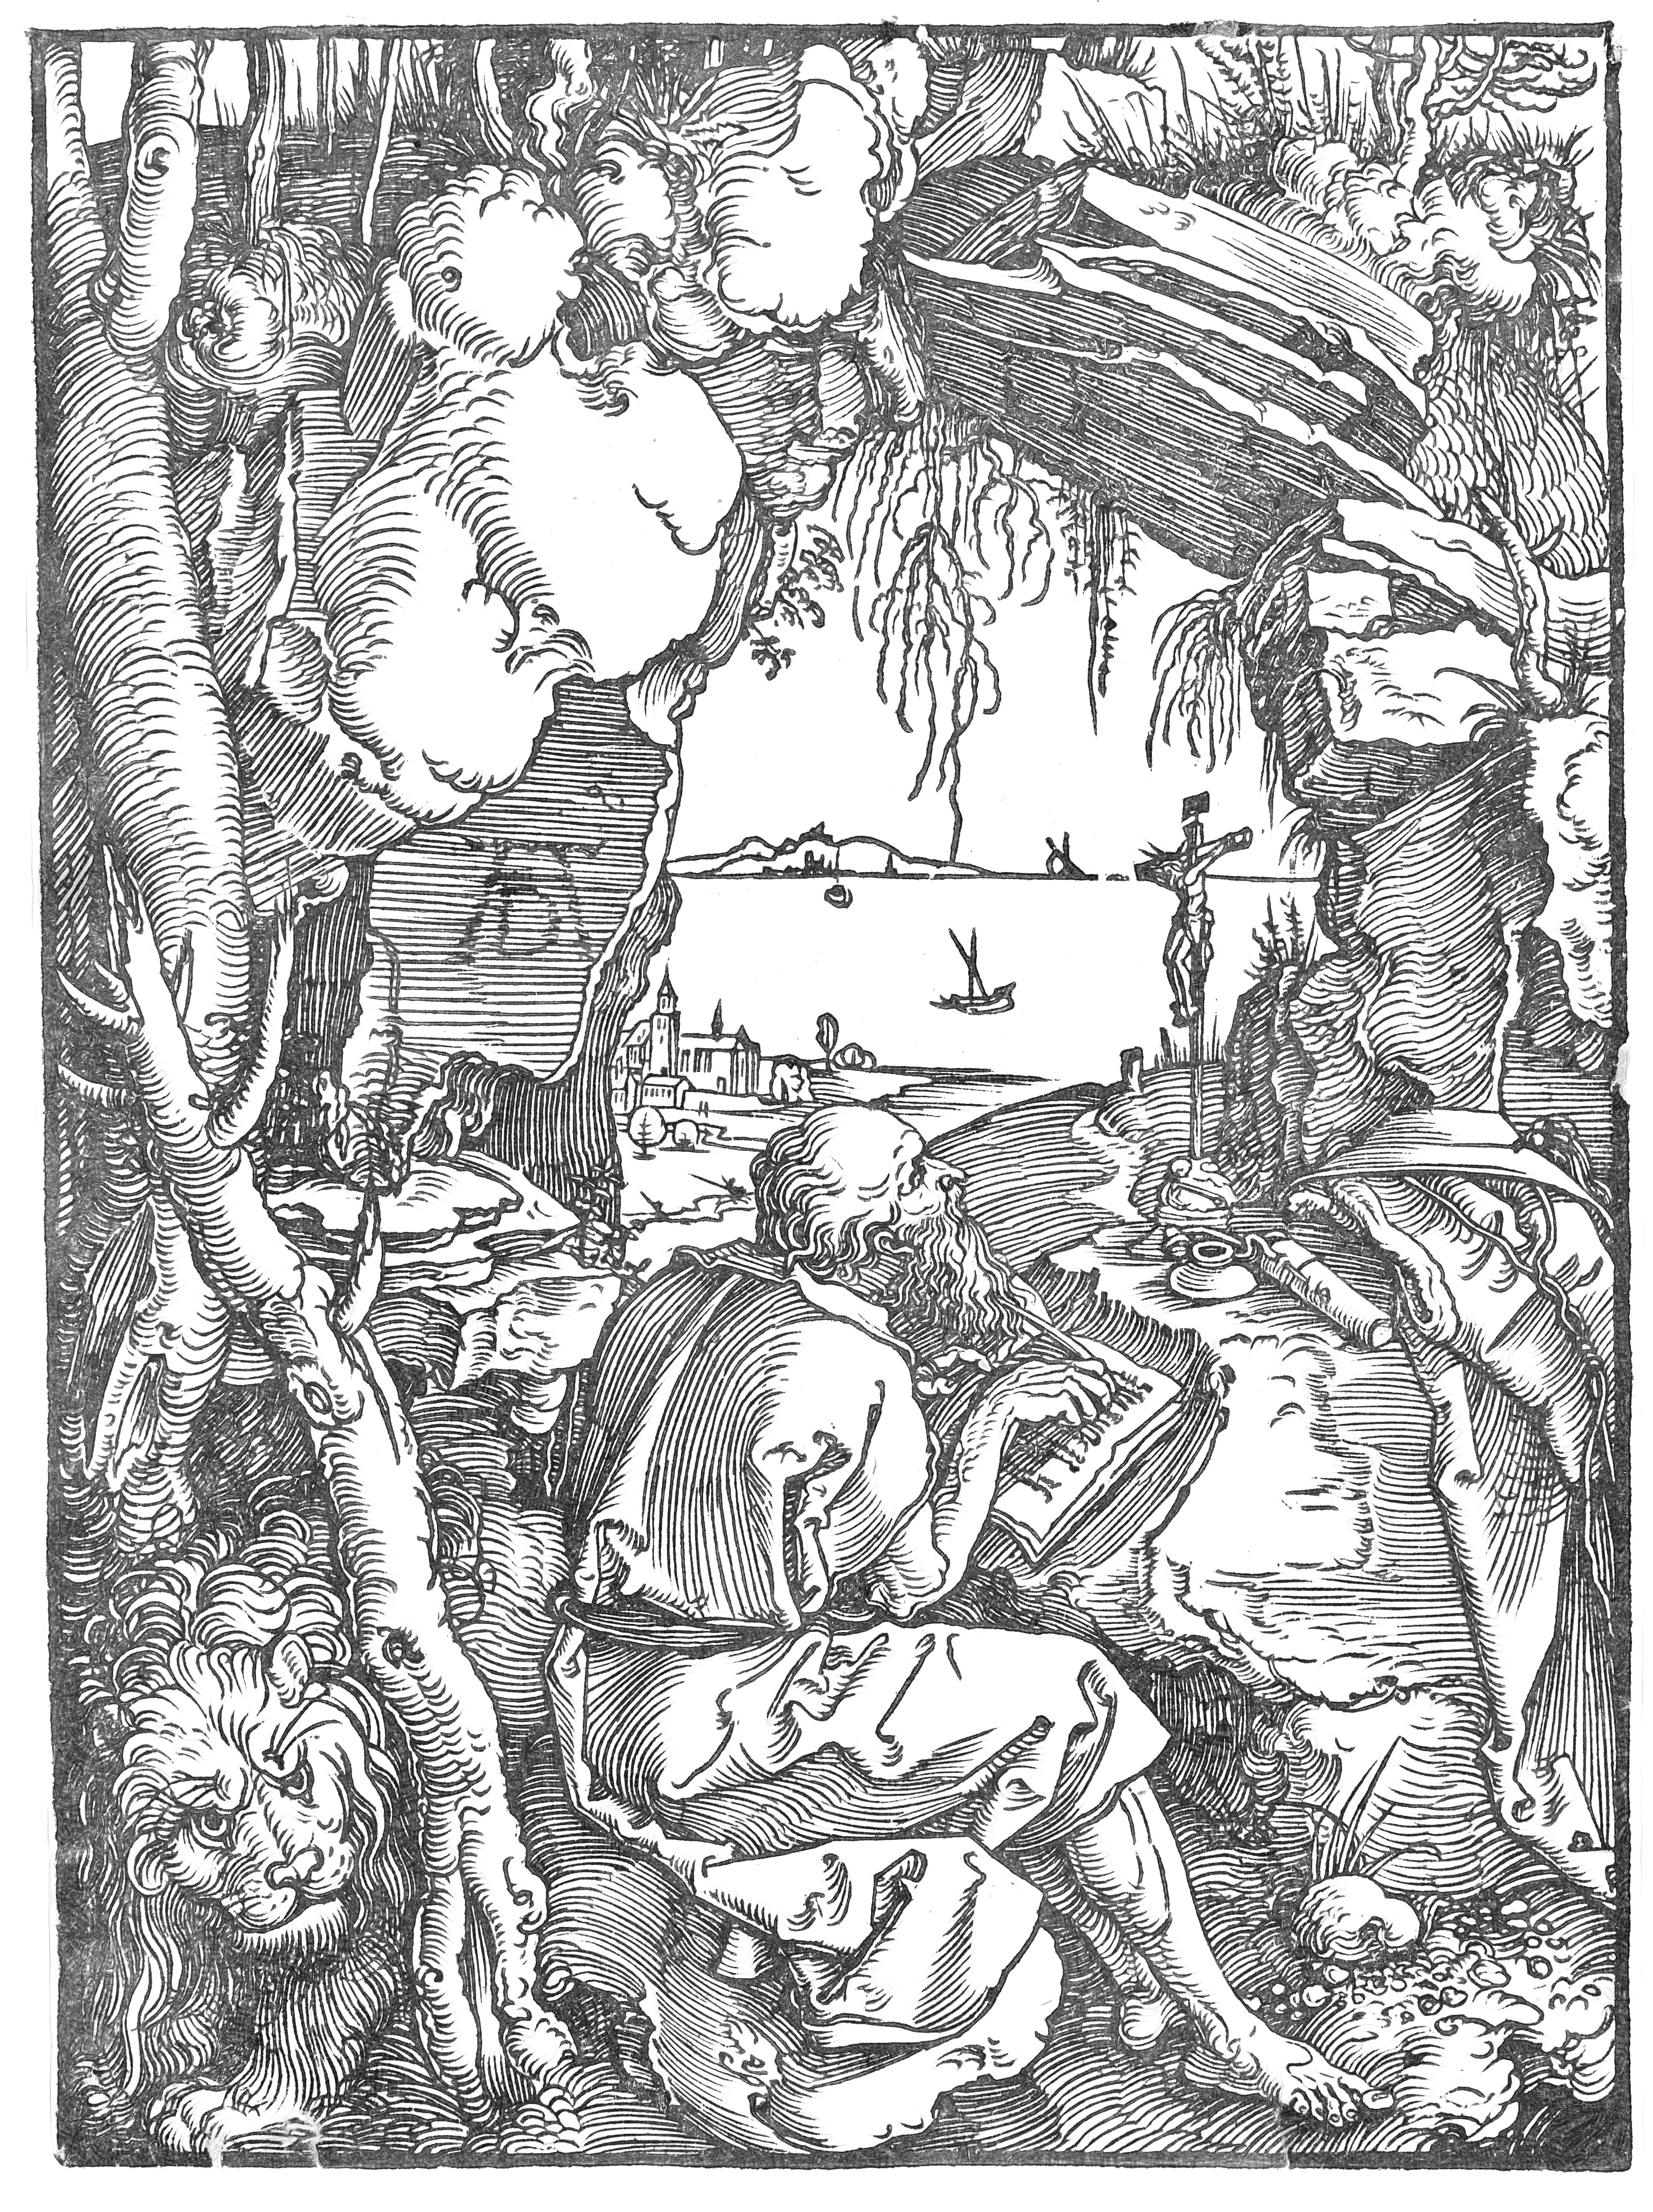 Saint Jerome in a Grotto (1512) by Albrecht Dürer - Catholic Coloring Page